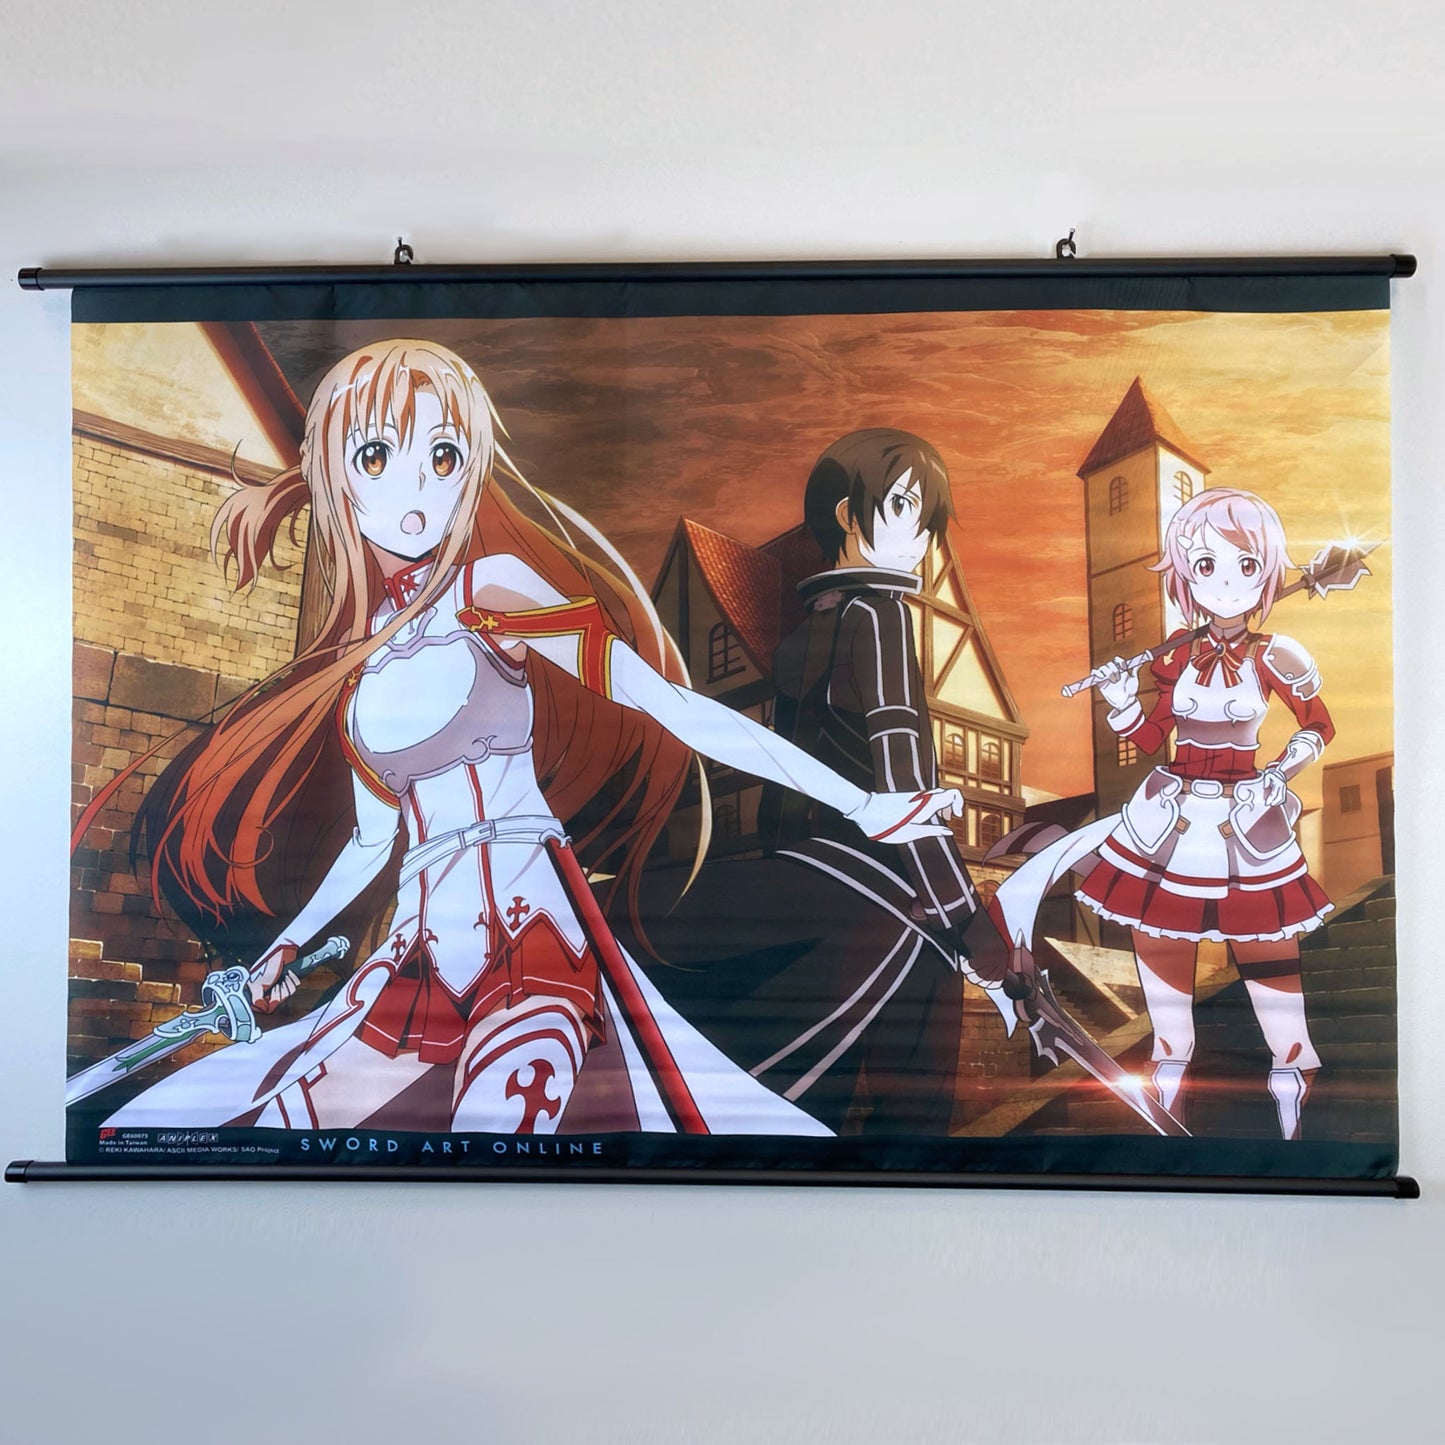 Sword Art Online Anime Fabric Wall Scroll Poster (32 x 11)  Inches[A]-Sword-57 (L)